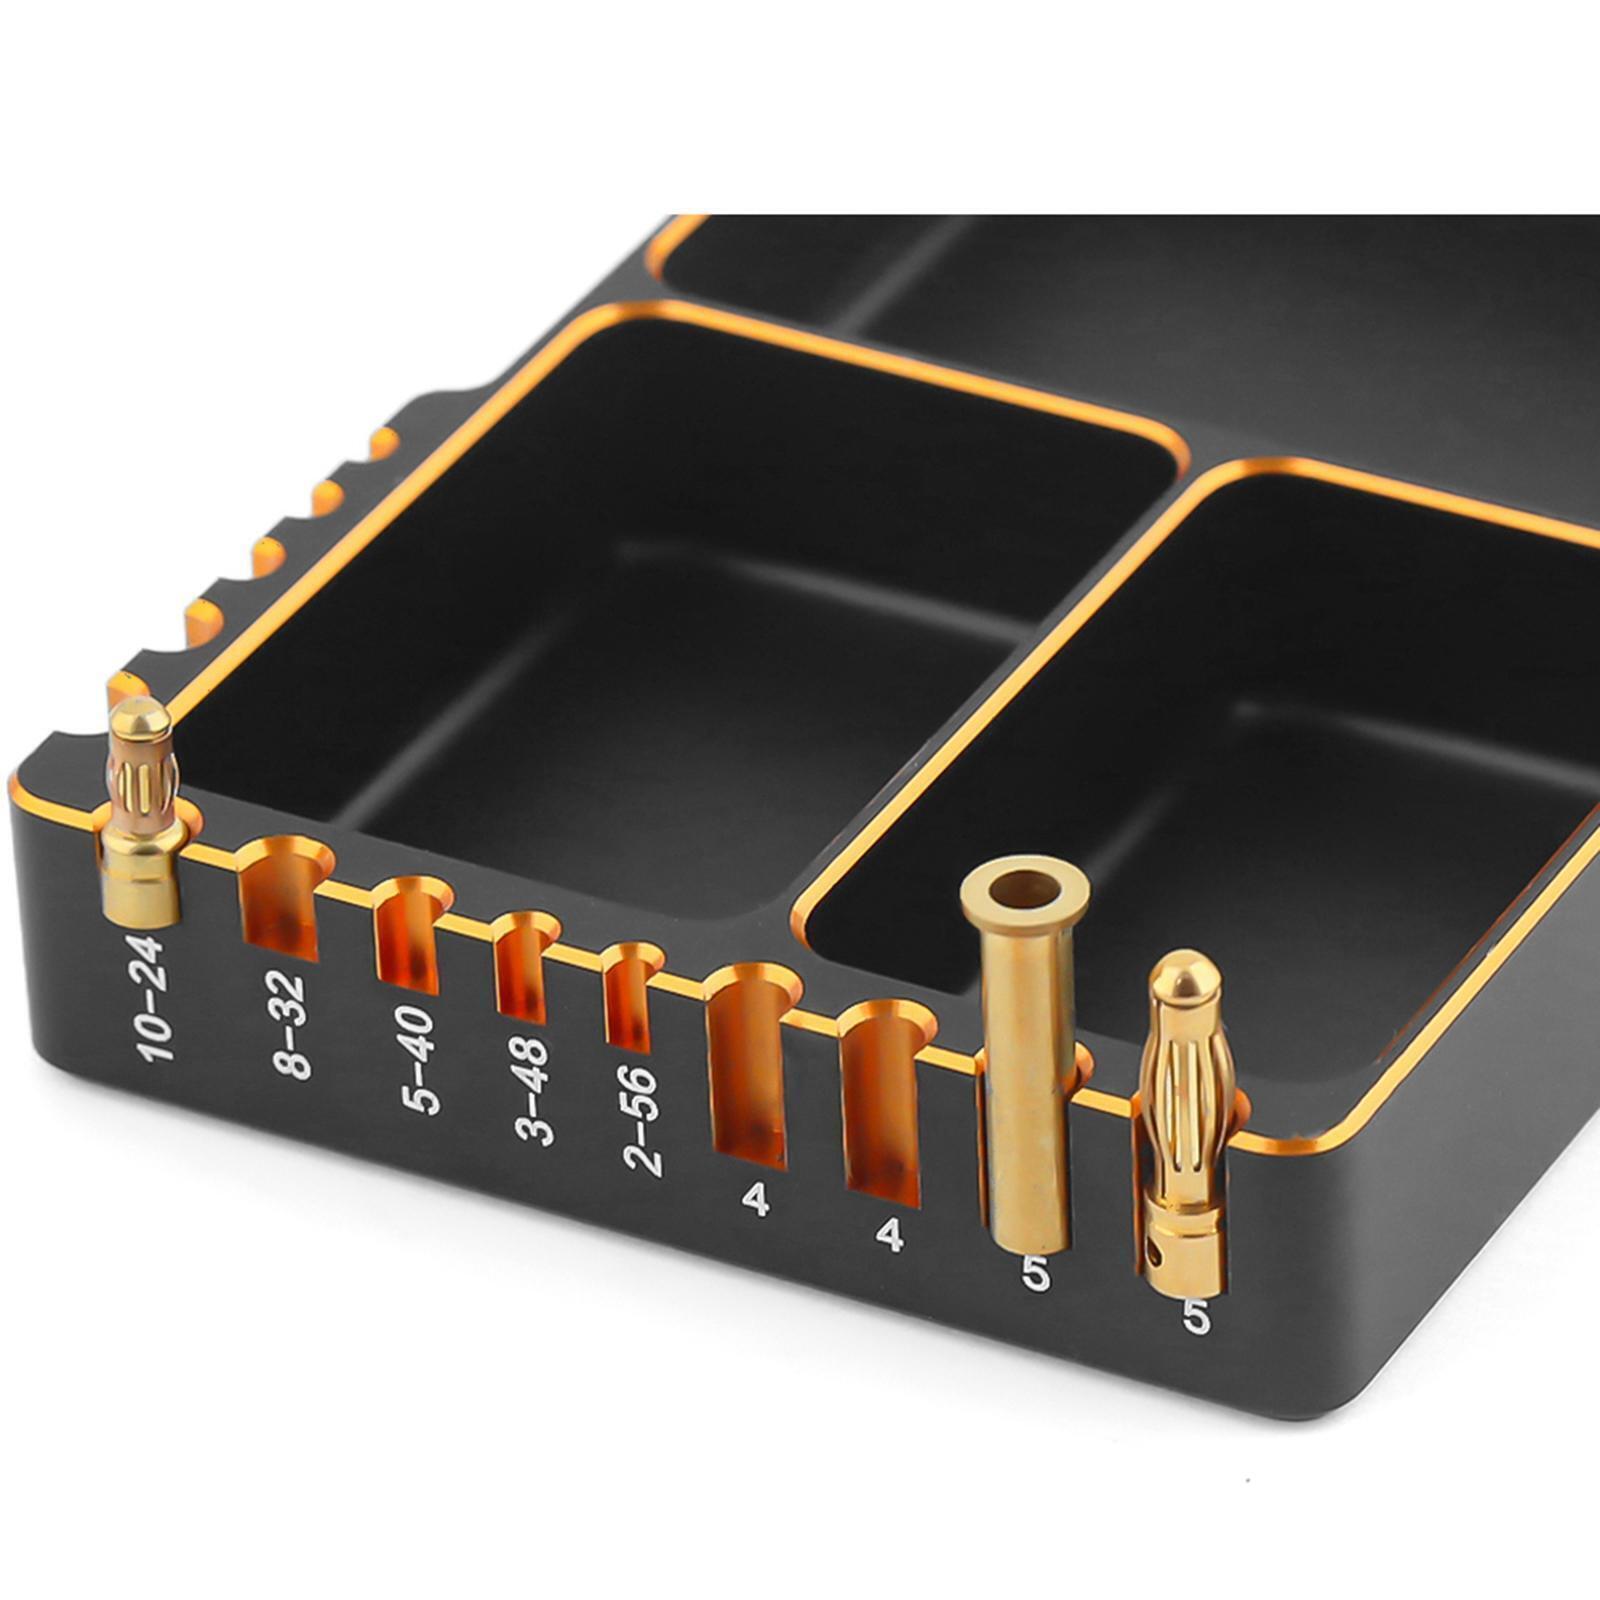 ProtonRC Multifunction Measuring Tools Parts Screw Tray Black with Golden Edge